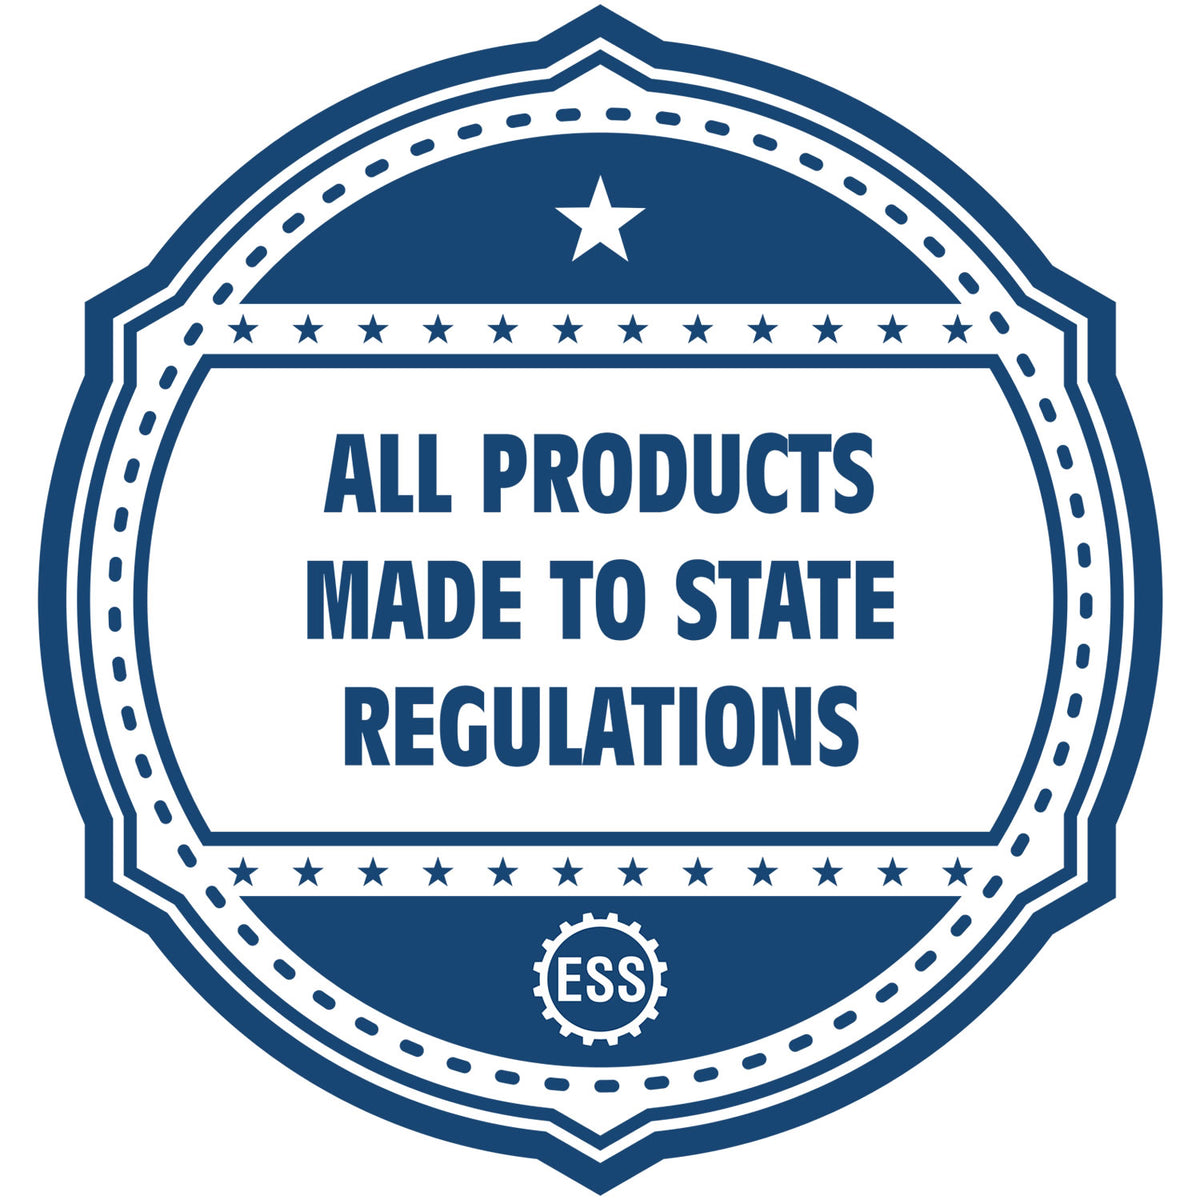 A blue icon or badge for the New Mexico Professional Geologist Seal Stamp showing that this product is made in compliance with state regulations.